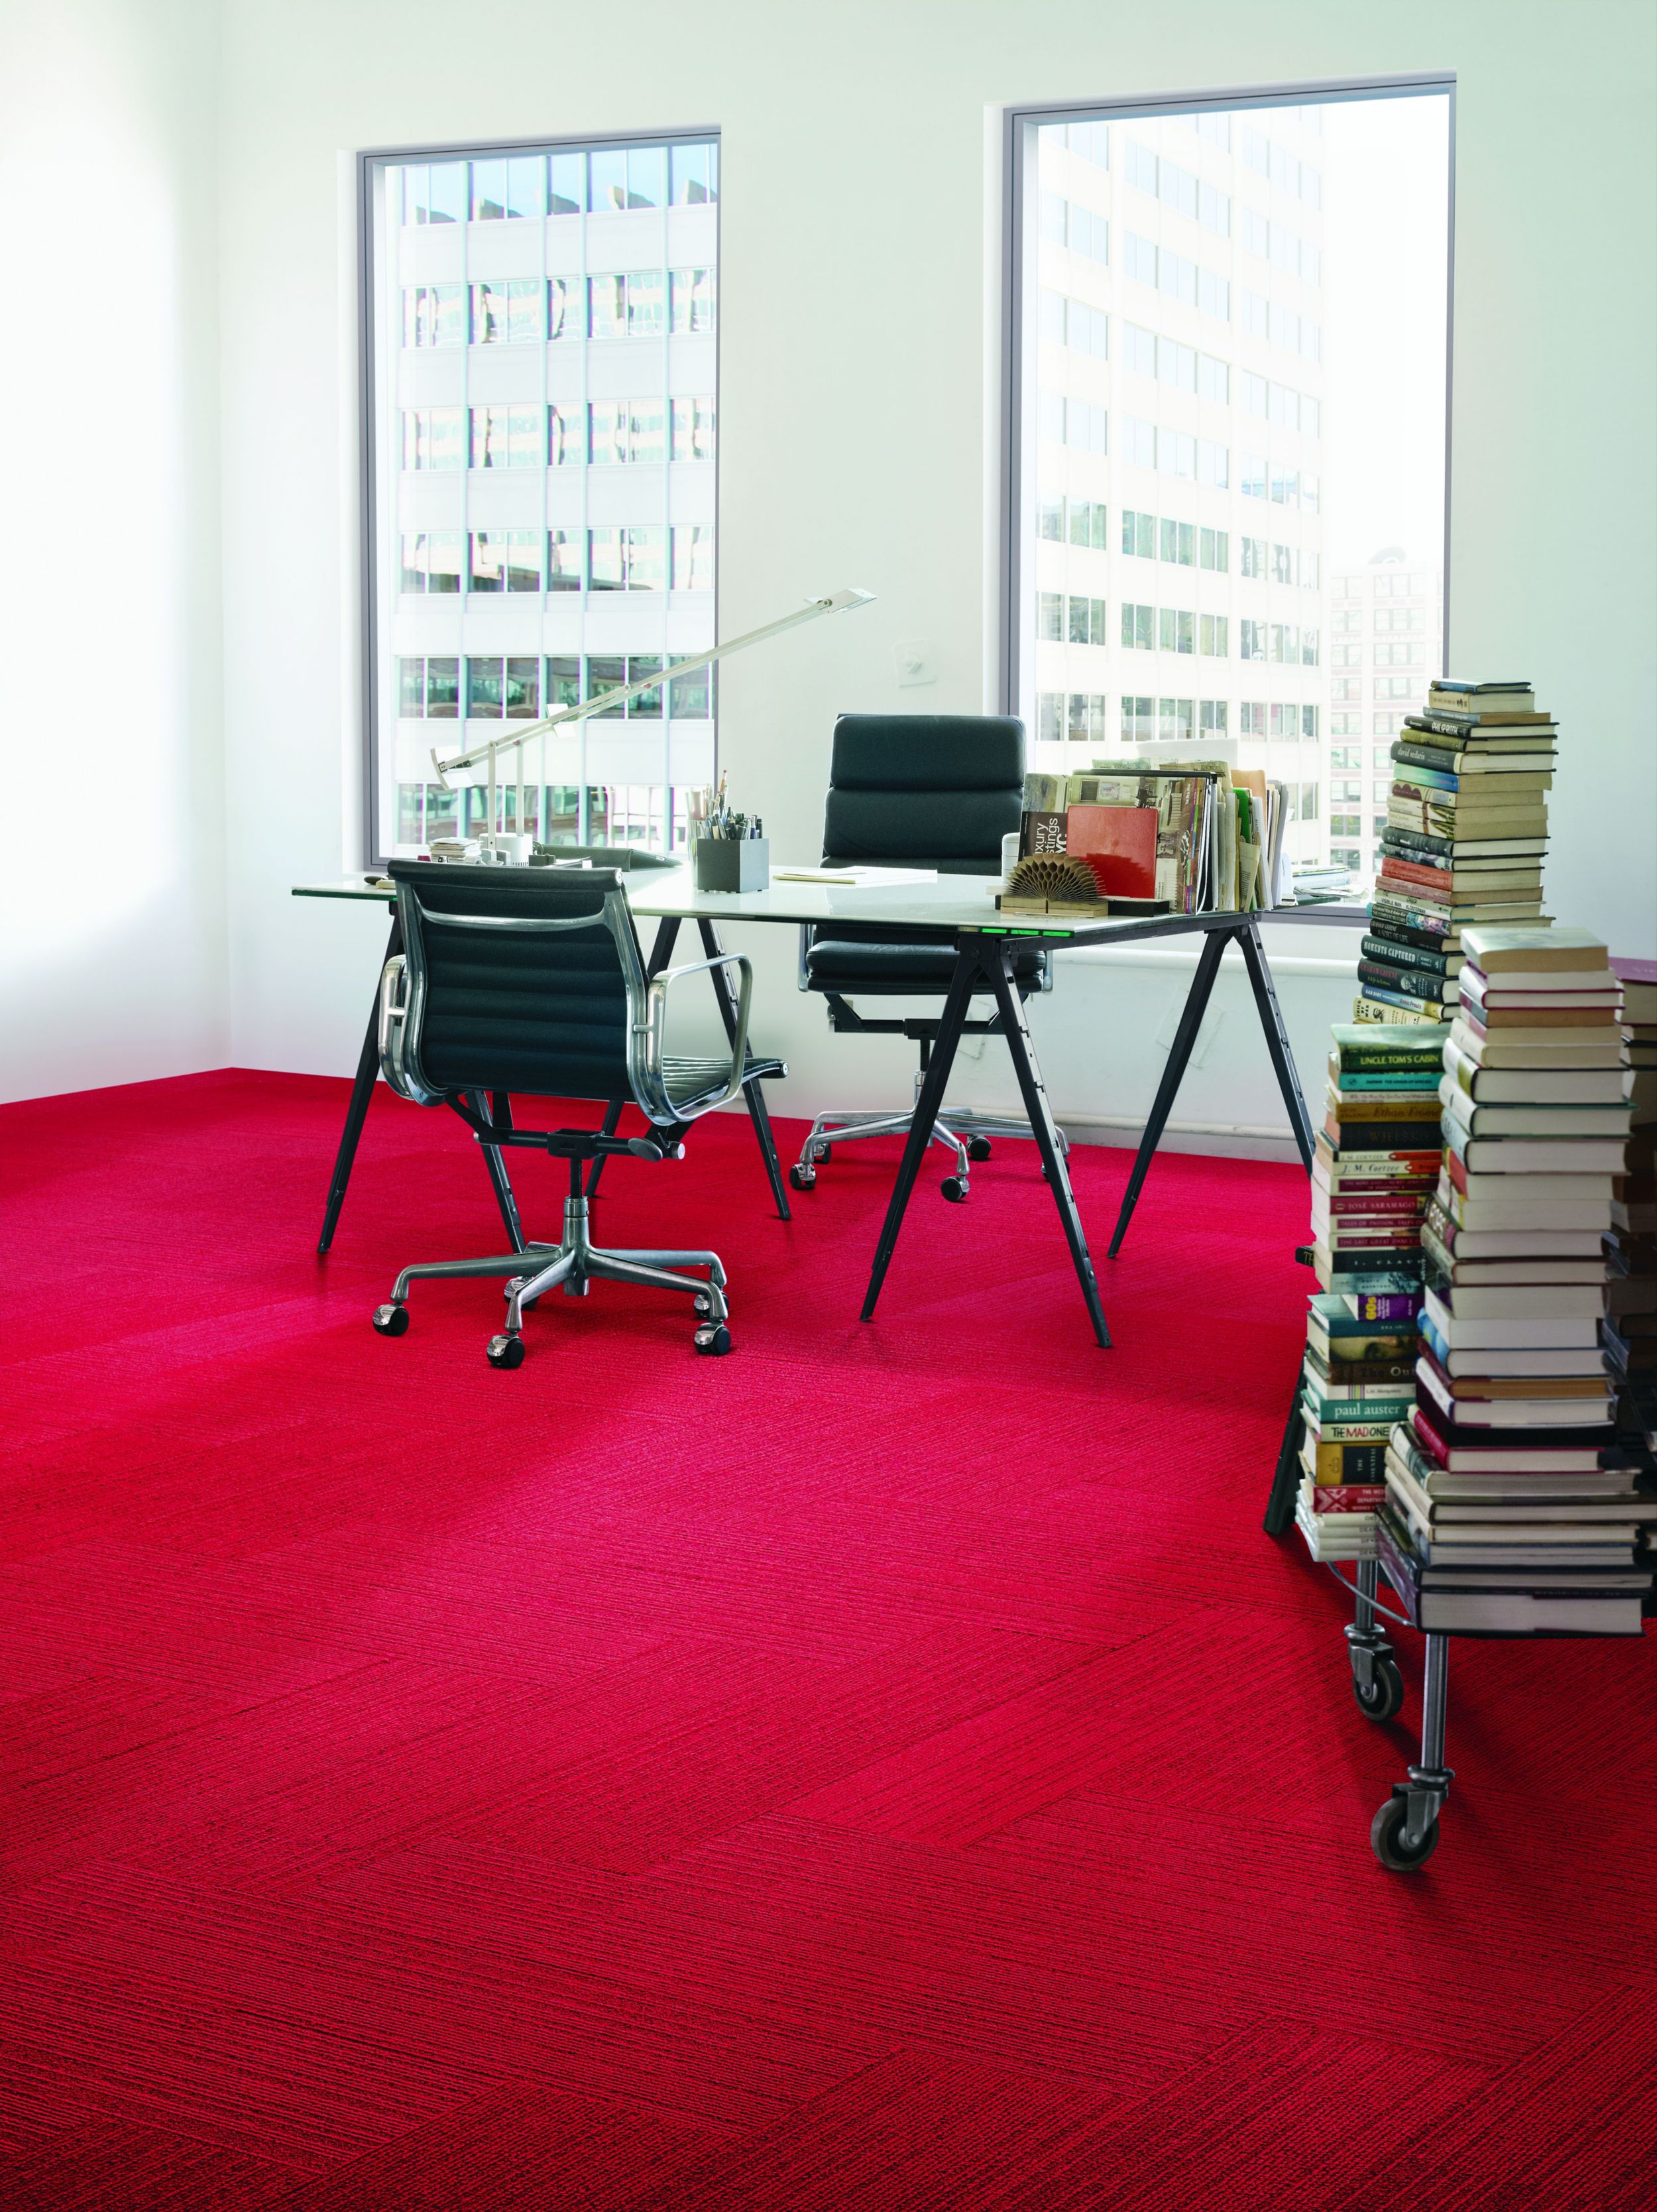 image Interface On Line plank carpet tile in space with desk and stacks of books against wall numéro 5